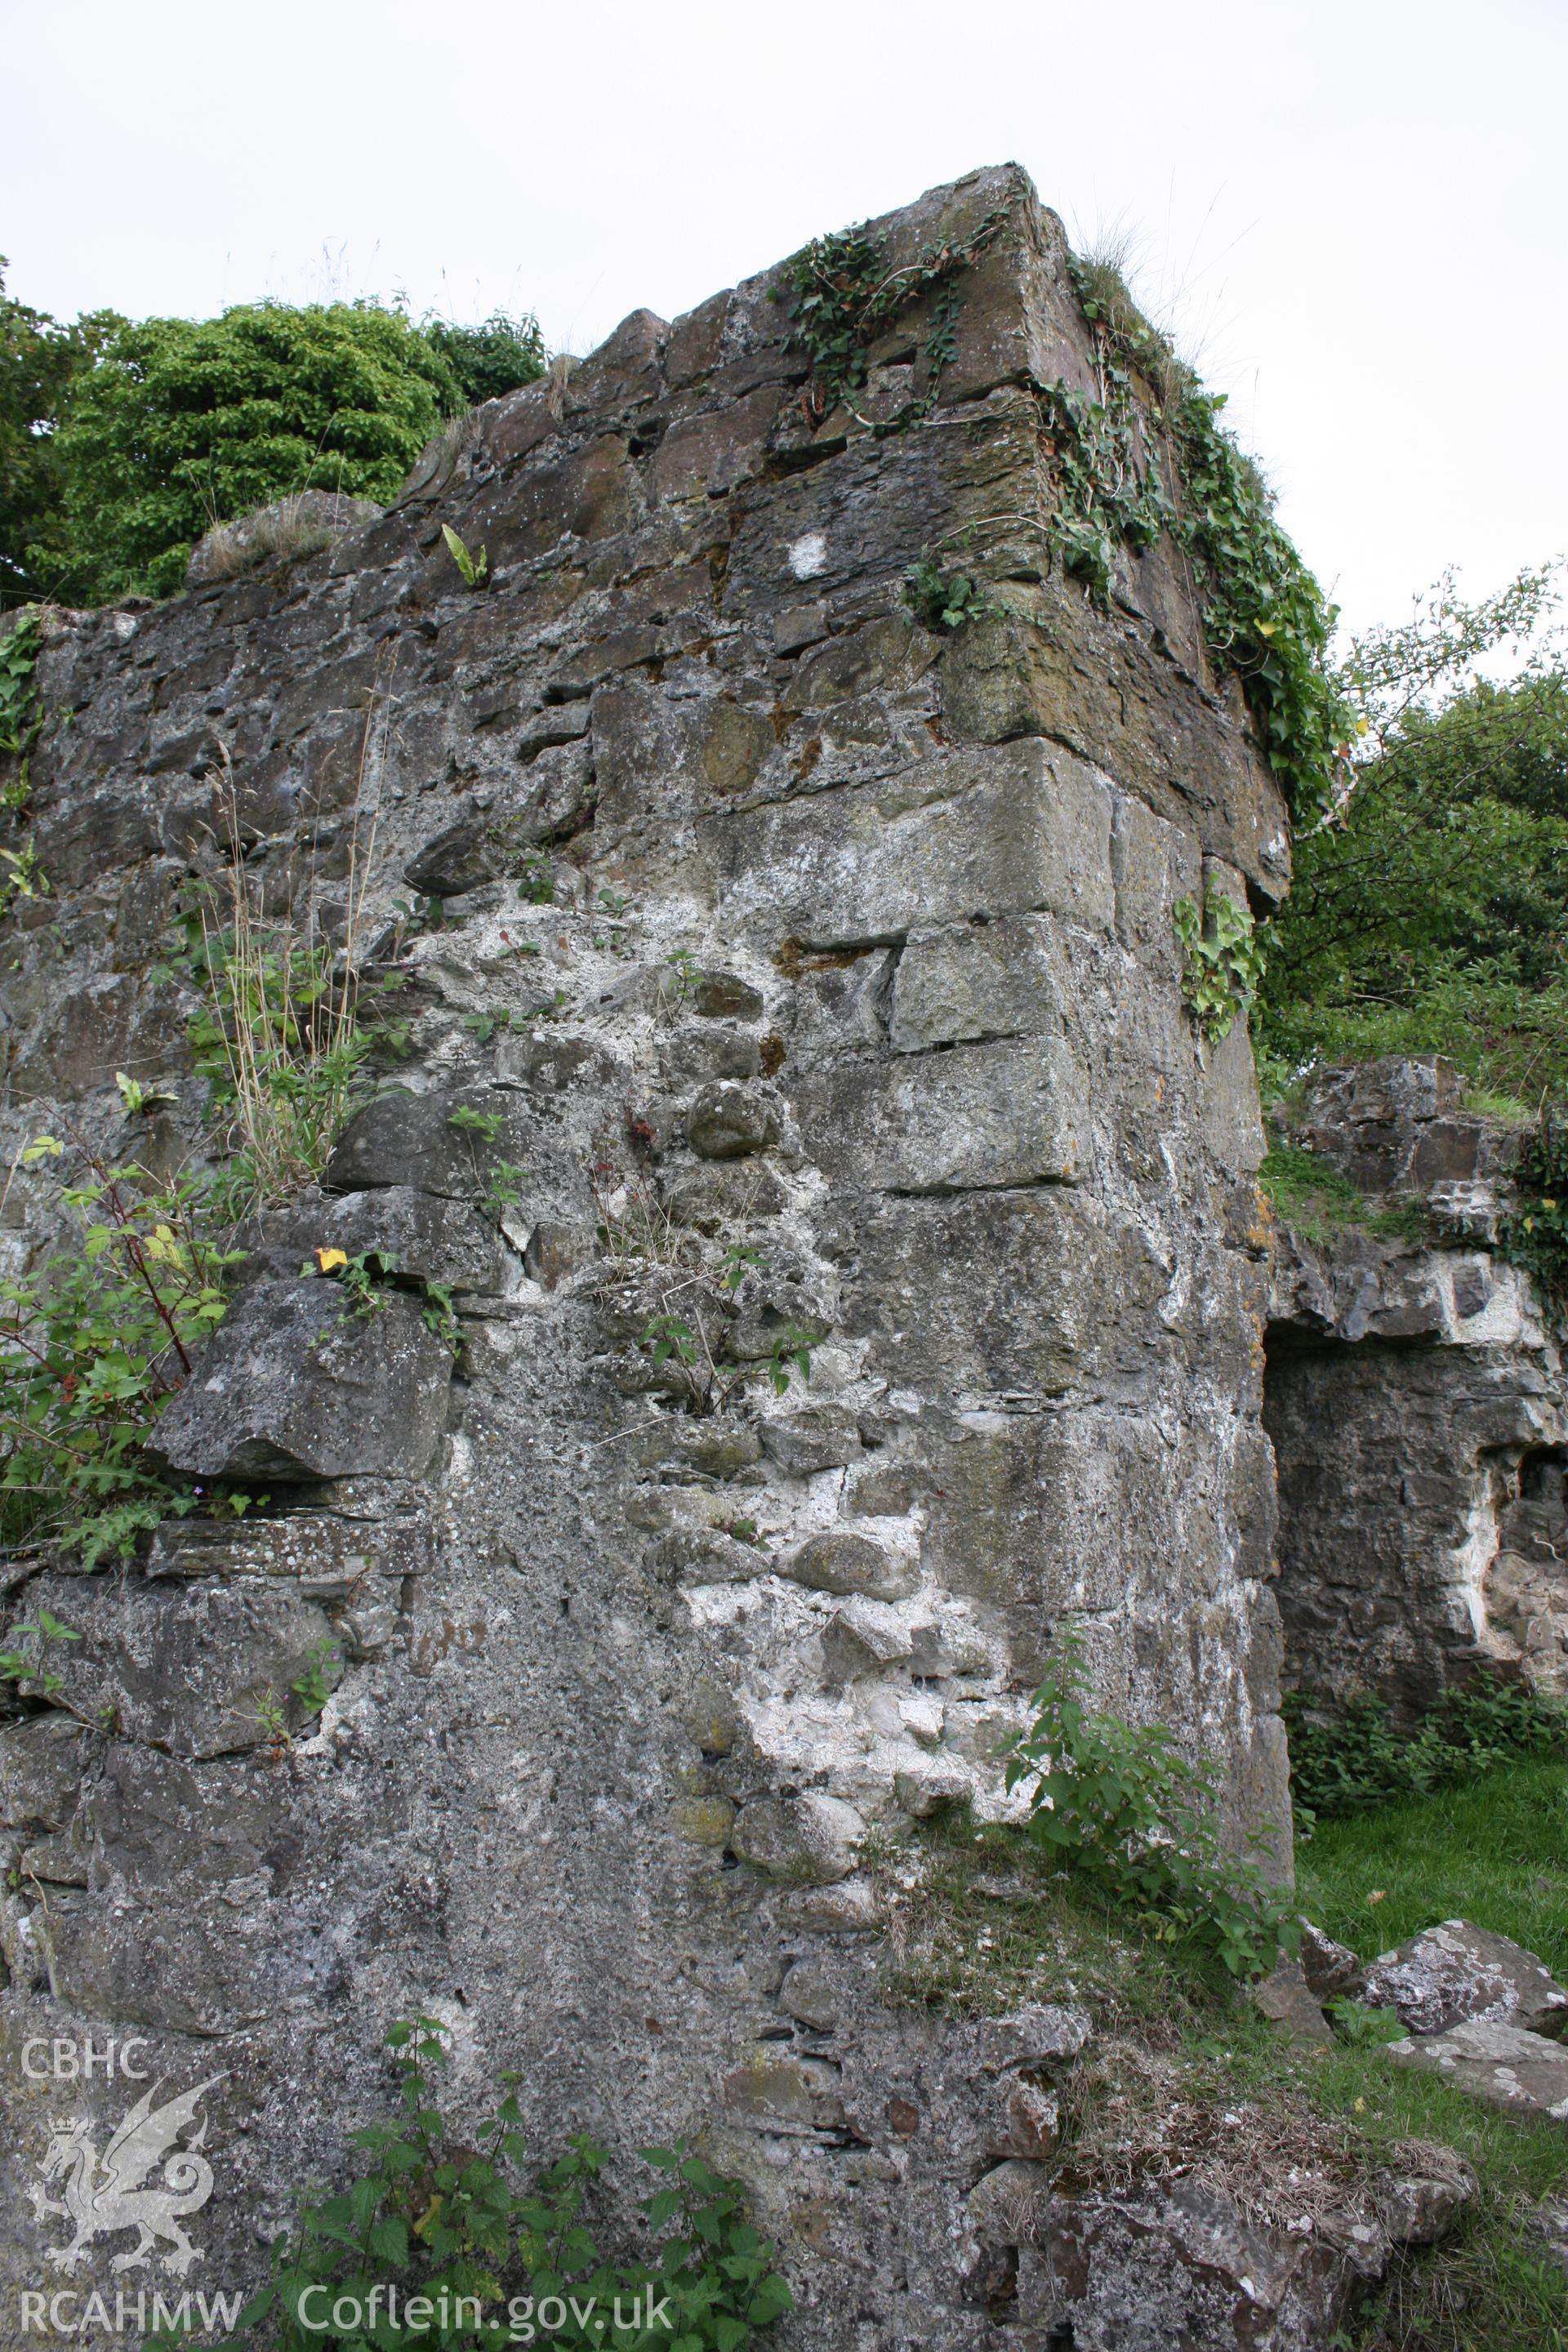 This photograph shows where the inner courtyard wall laps onto the wall of the Stewards Tower. Rubble core of rounded stone, showing these were collected from a river or costal area.